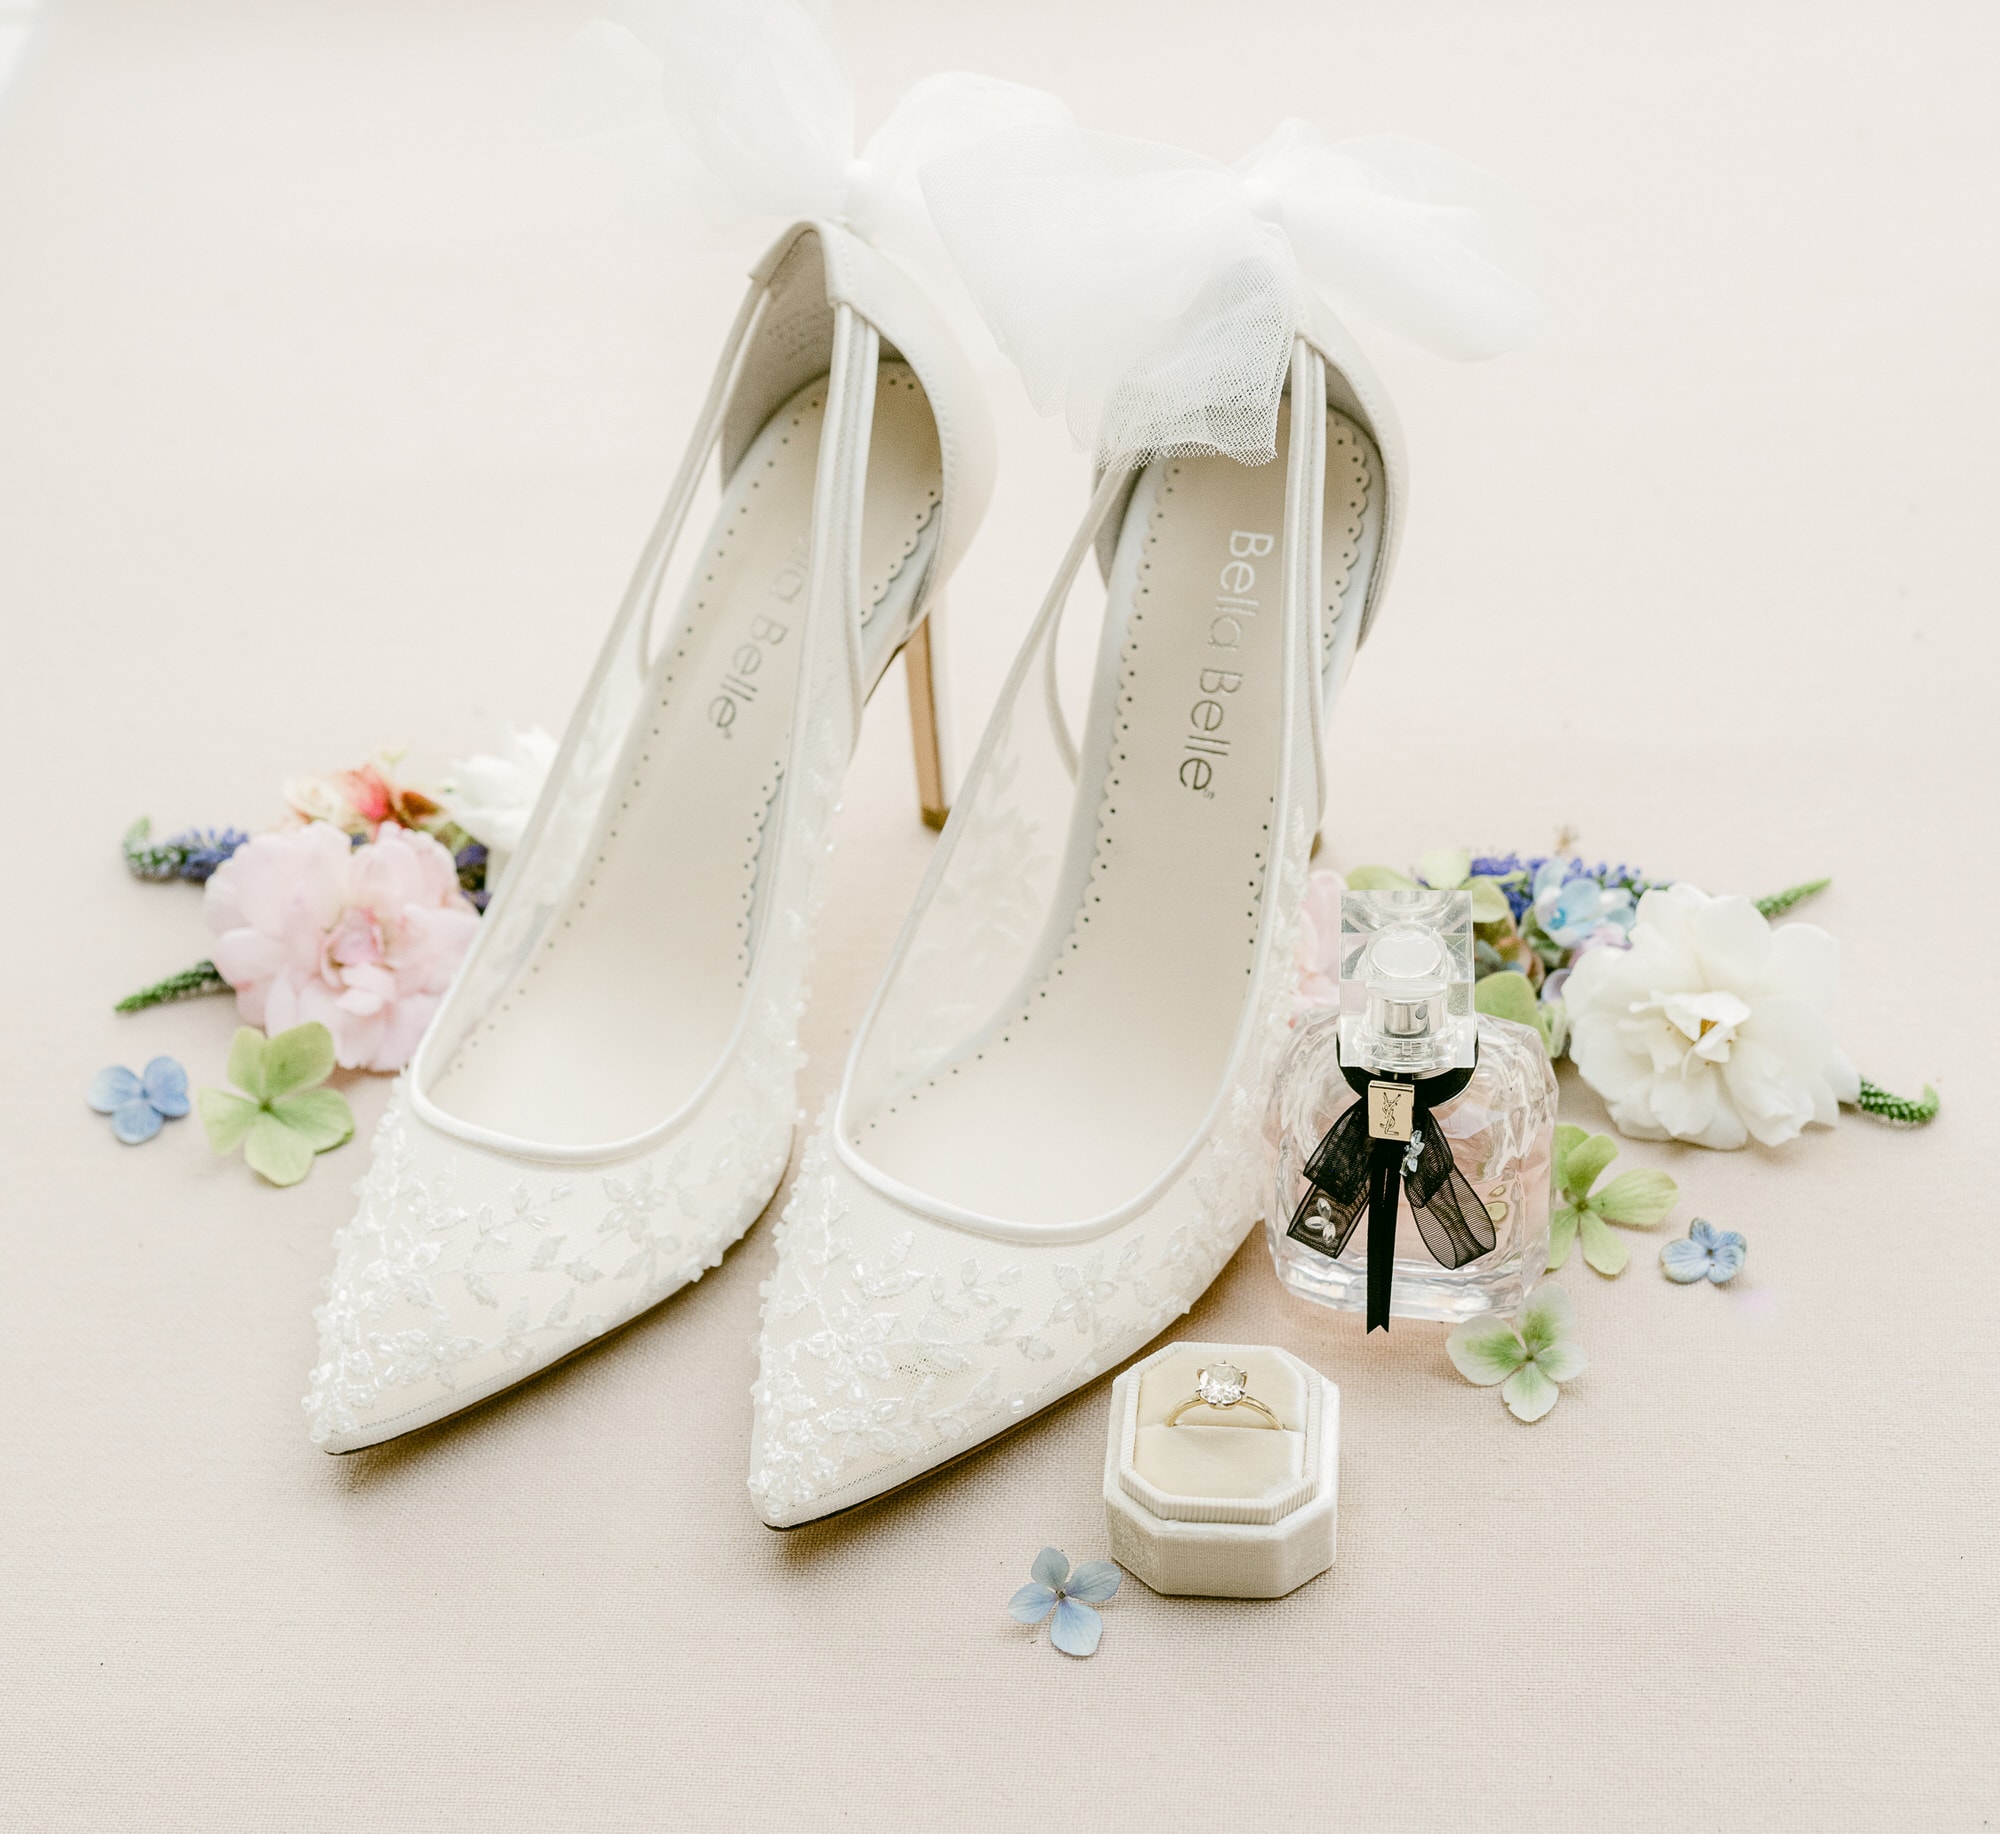 Bella Belle Edna bridal shoes by Serenity Photography